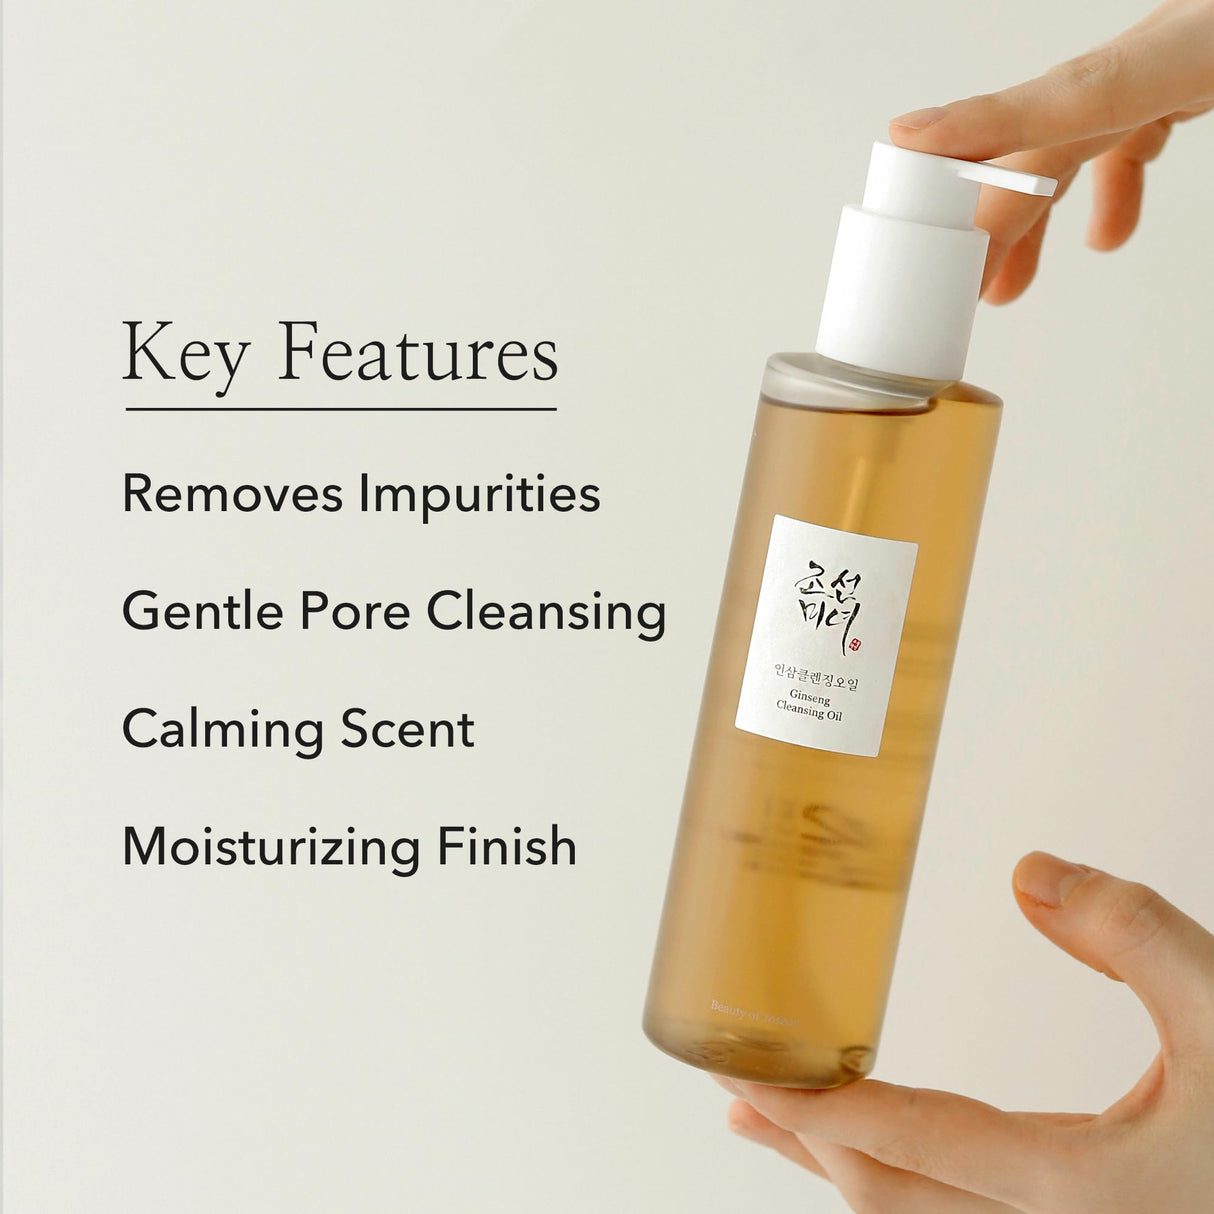 Beauty of Joseon Ginseng Cleansing Oil (210ml) - UShops